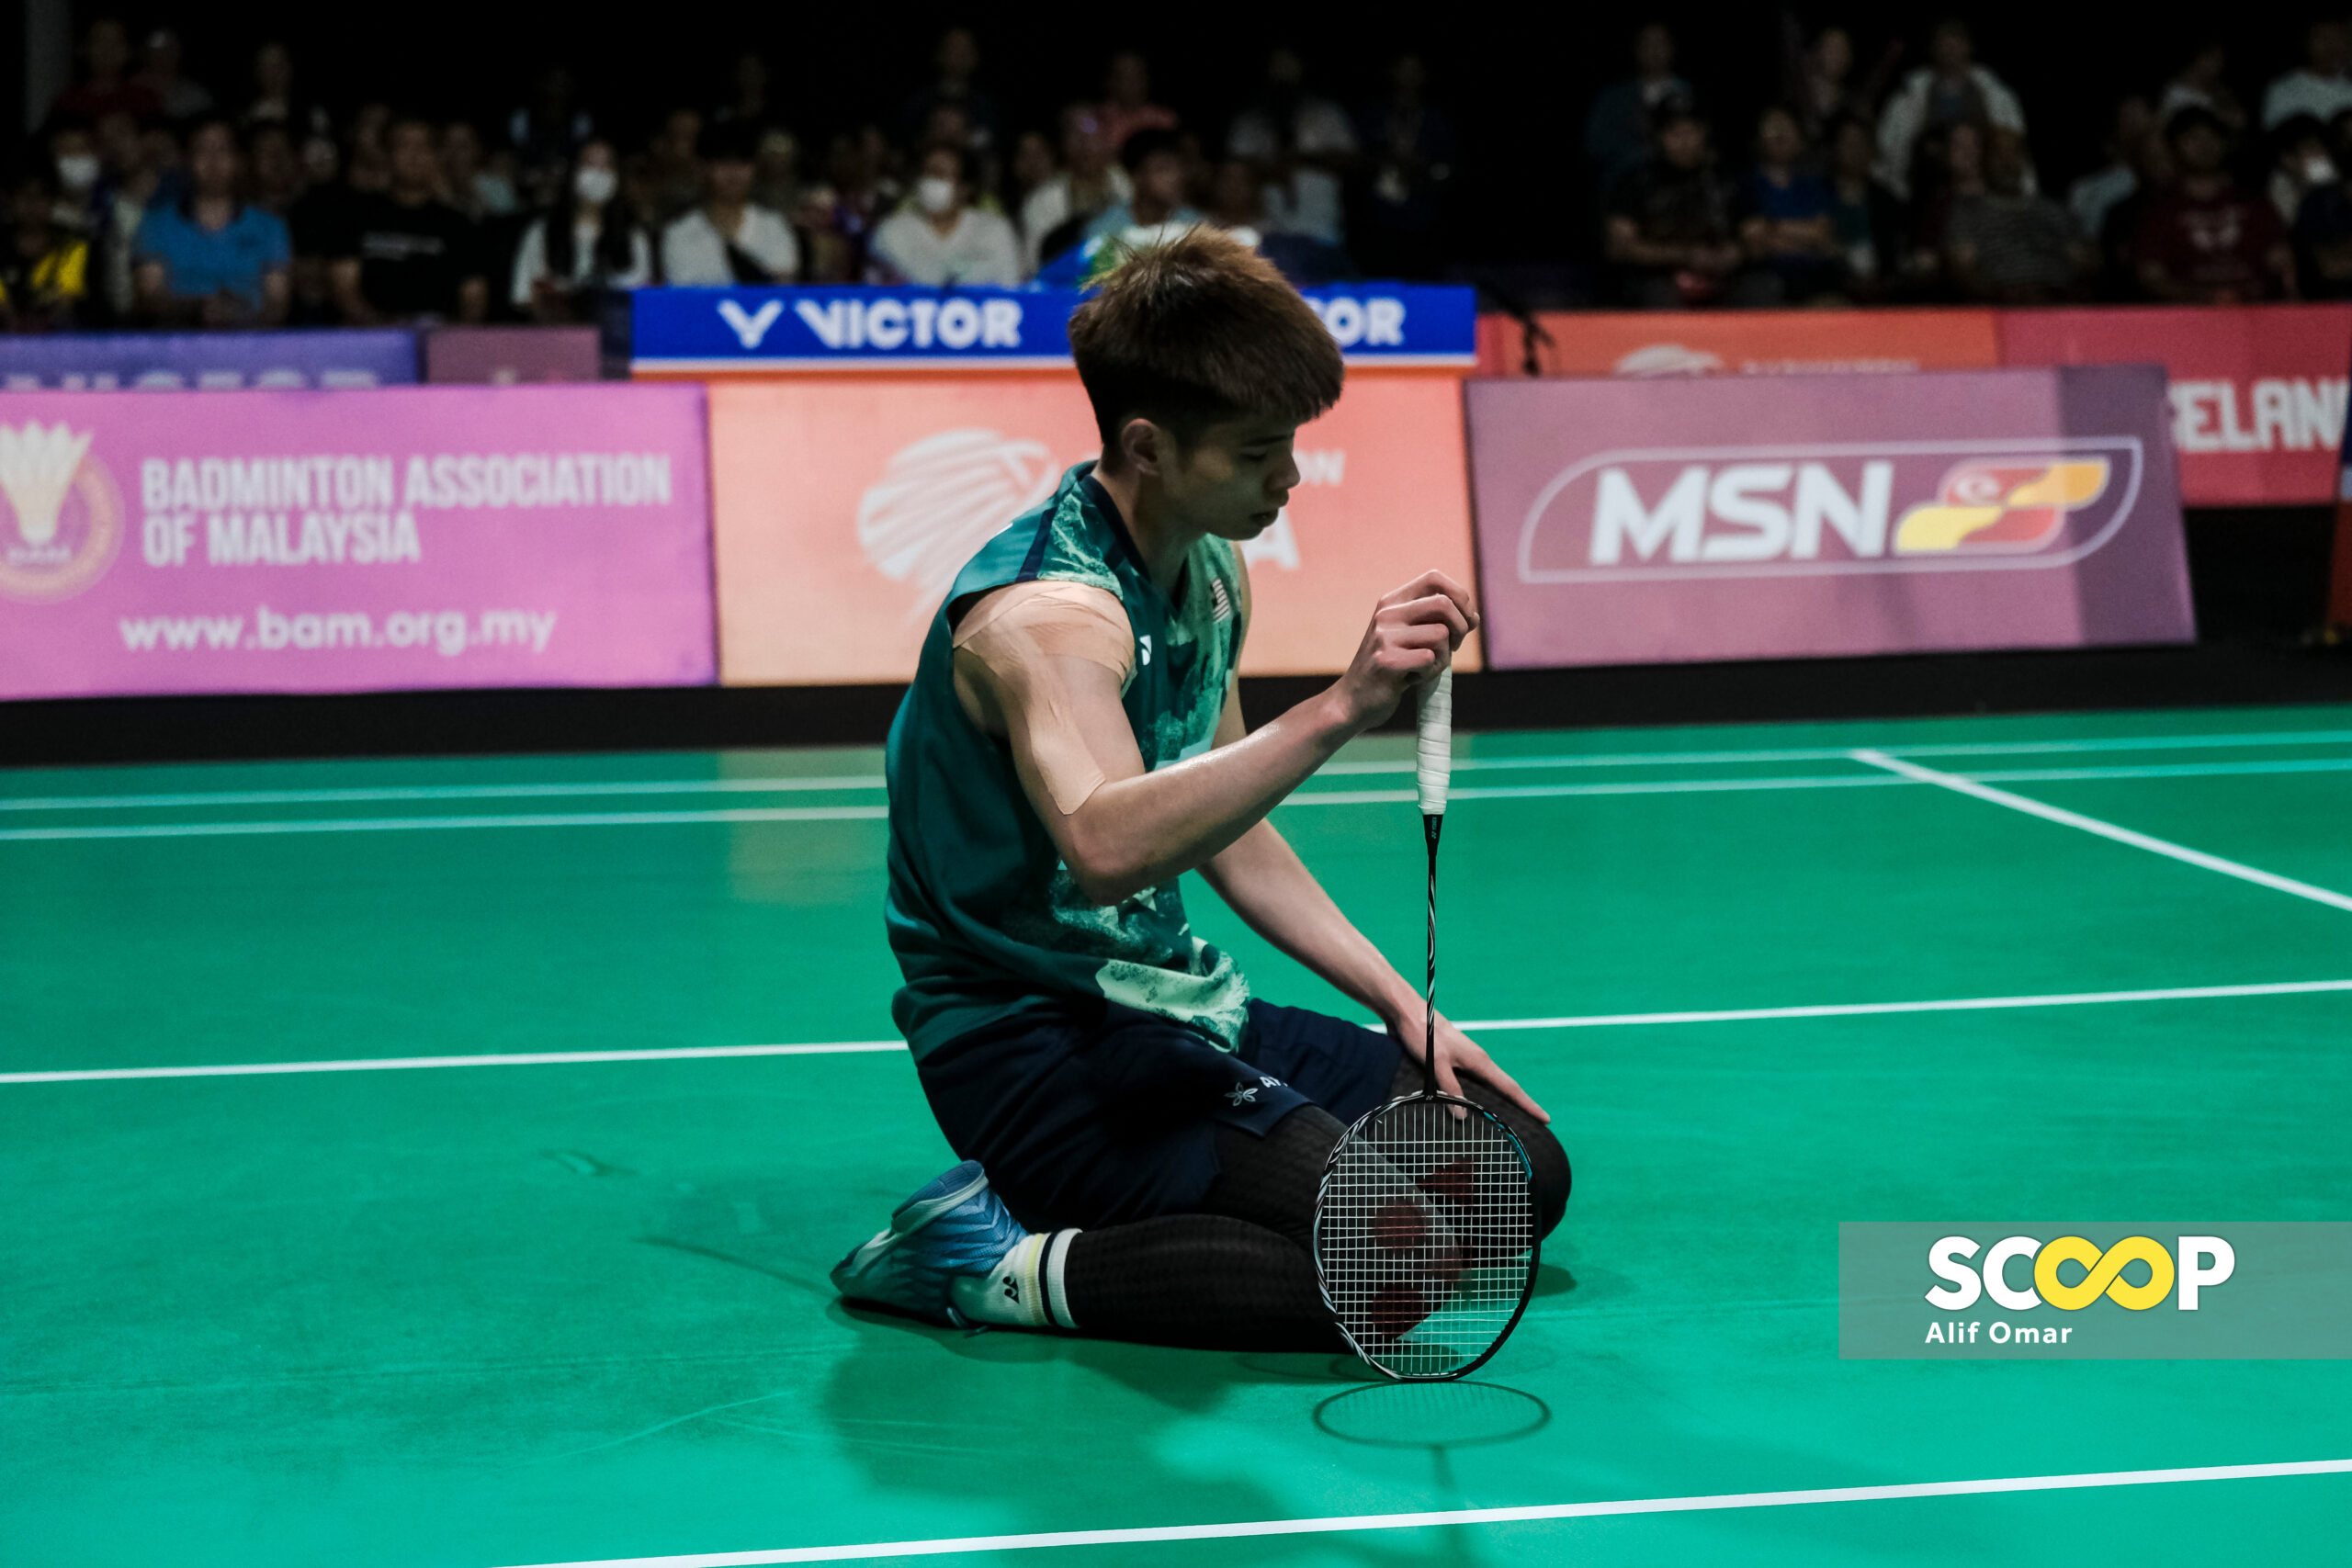 Photo of the day: Jun Hao seated in defeat after daring last-minute feat